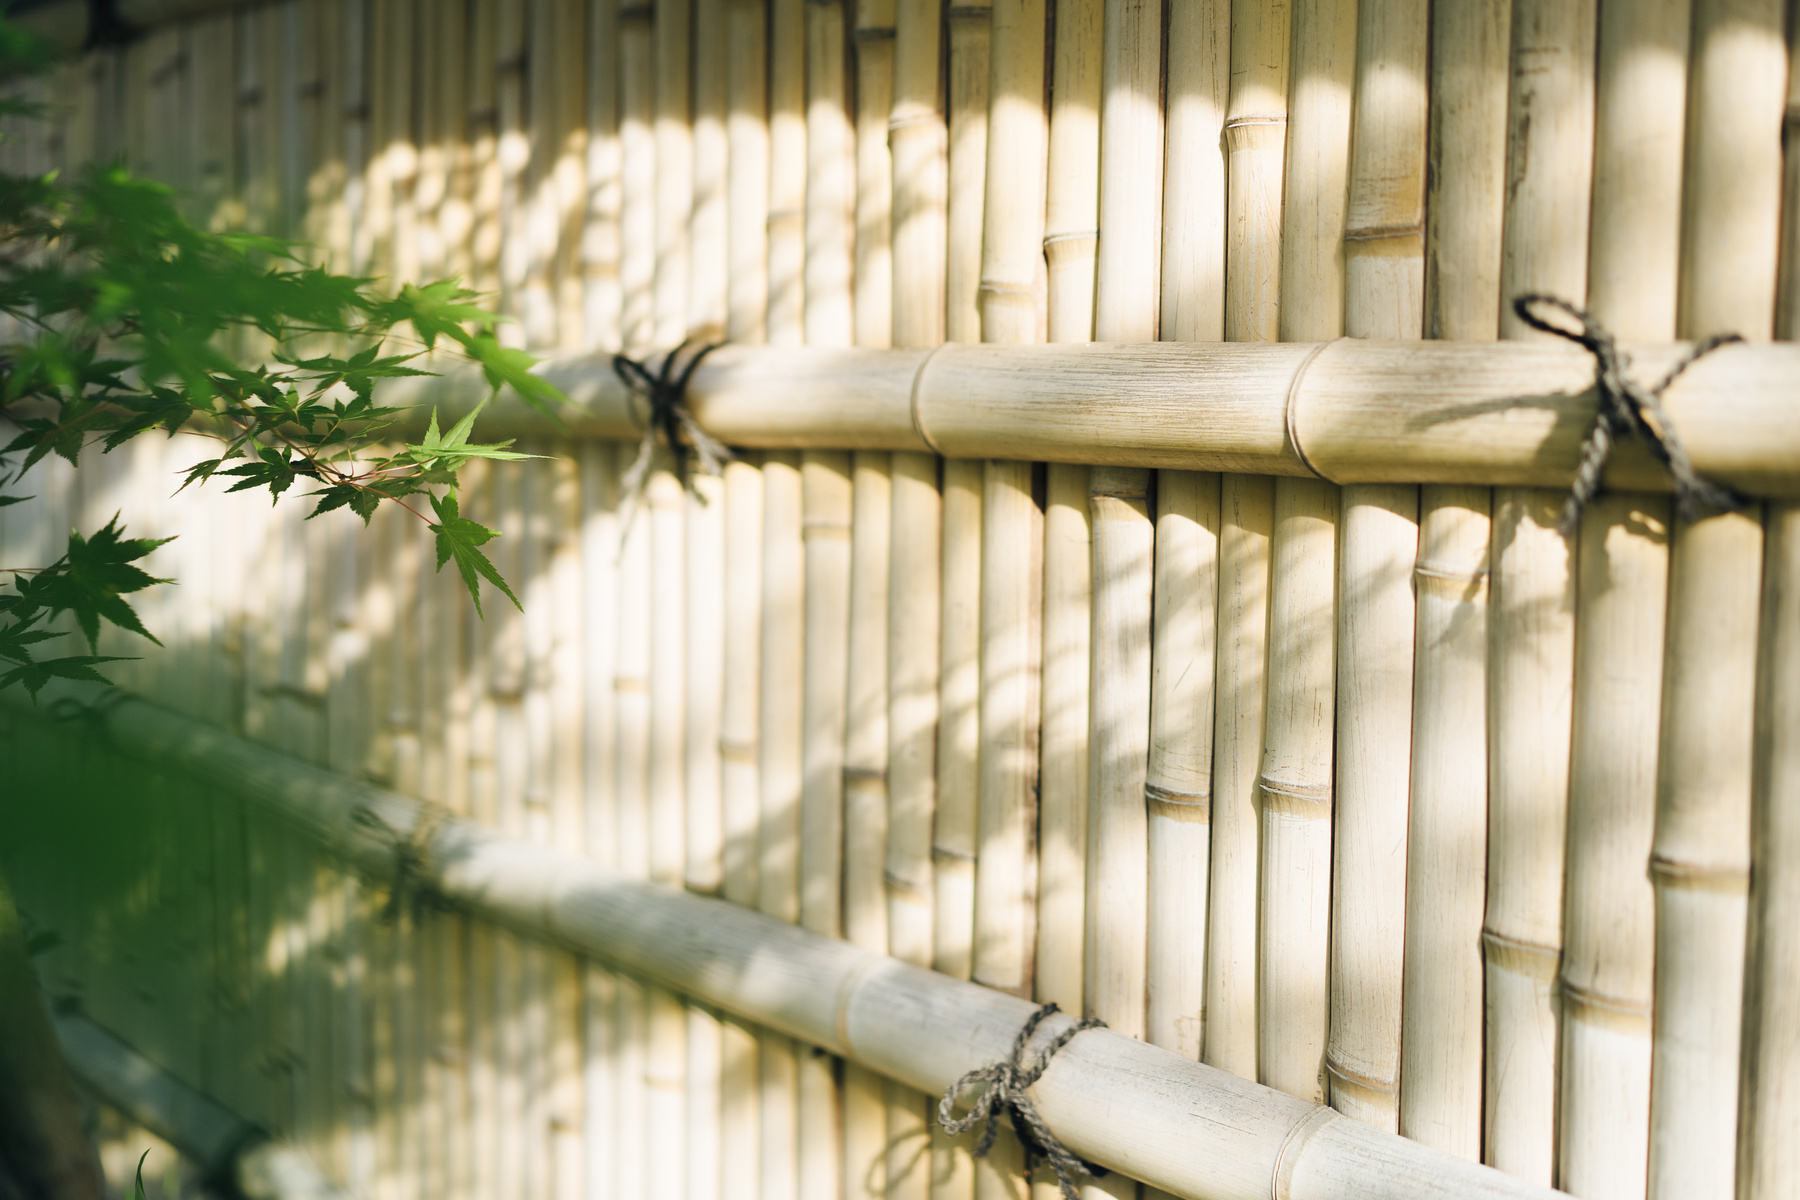 Bamboo Fence and Plant Leaves